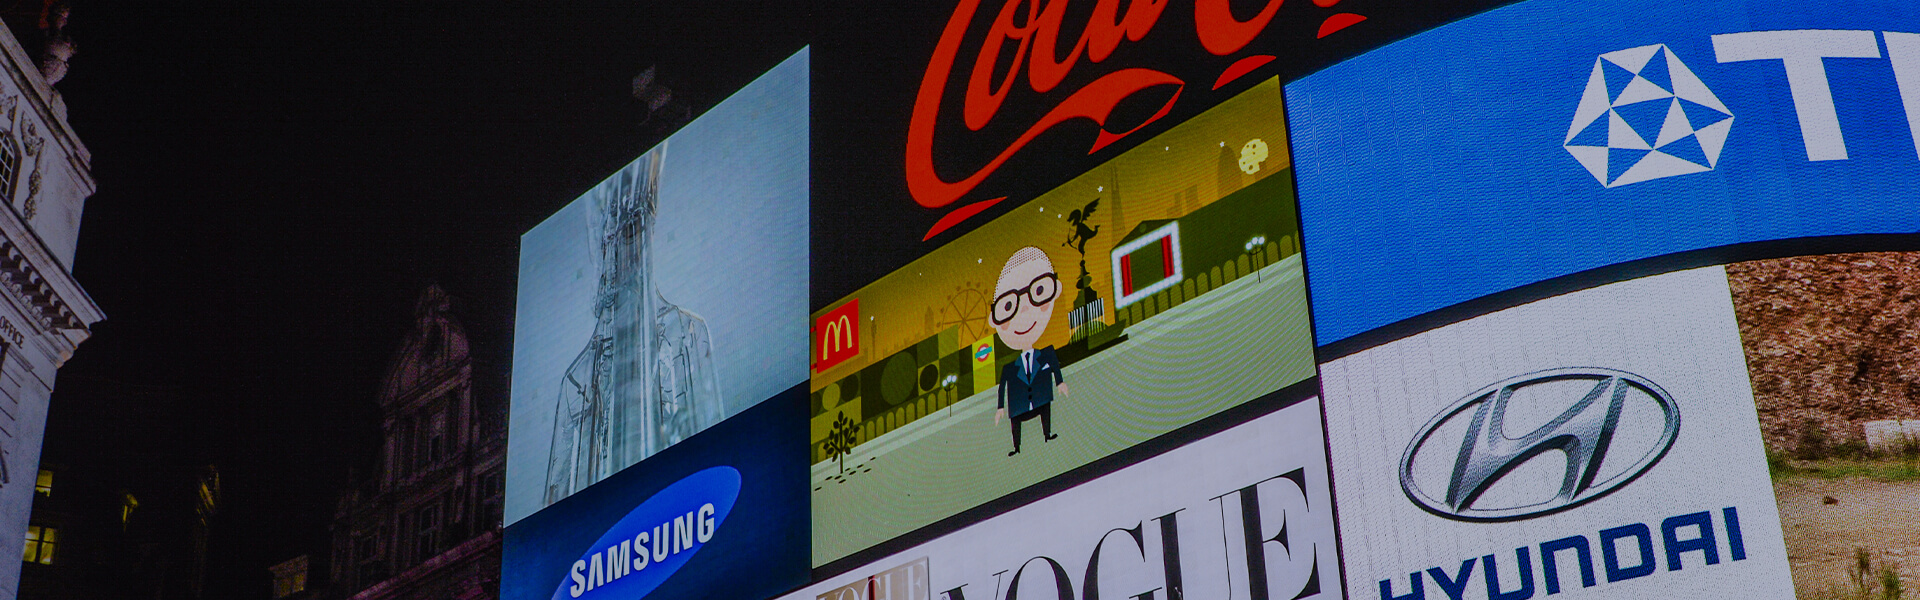 Image of billboard advertisements on Piccadilly Circus